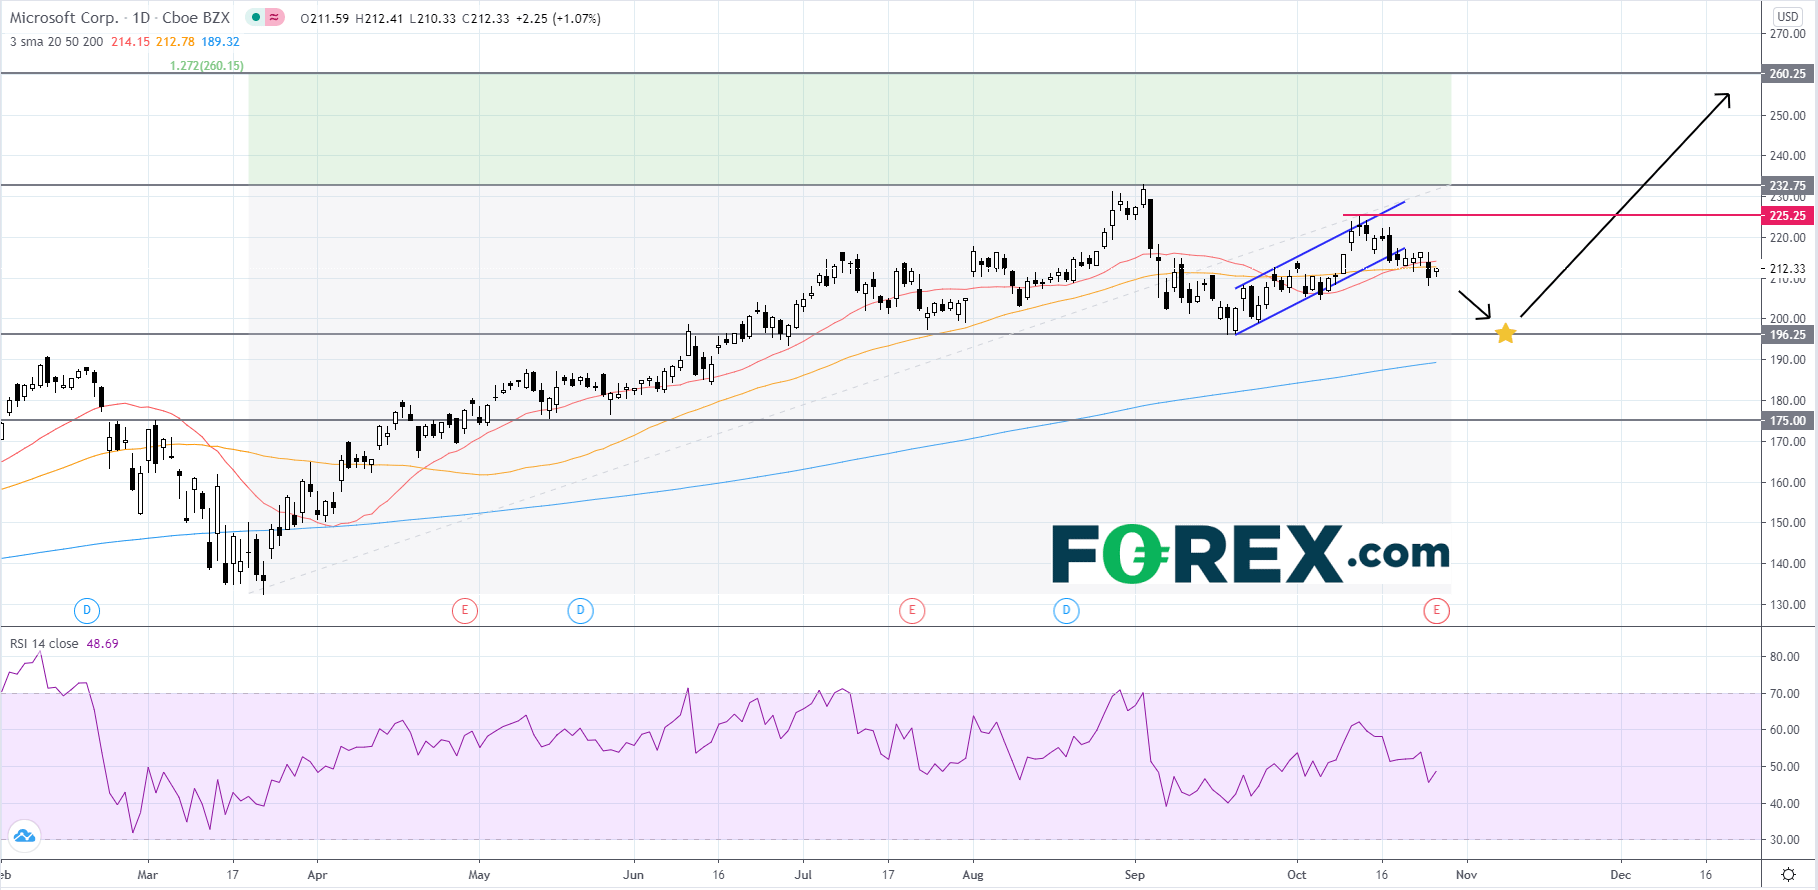 Chart analysis of Microsoft. Published in October 2020 by FOREX.com